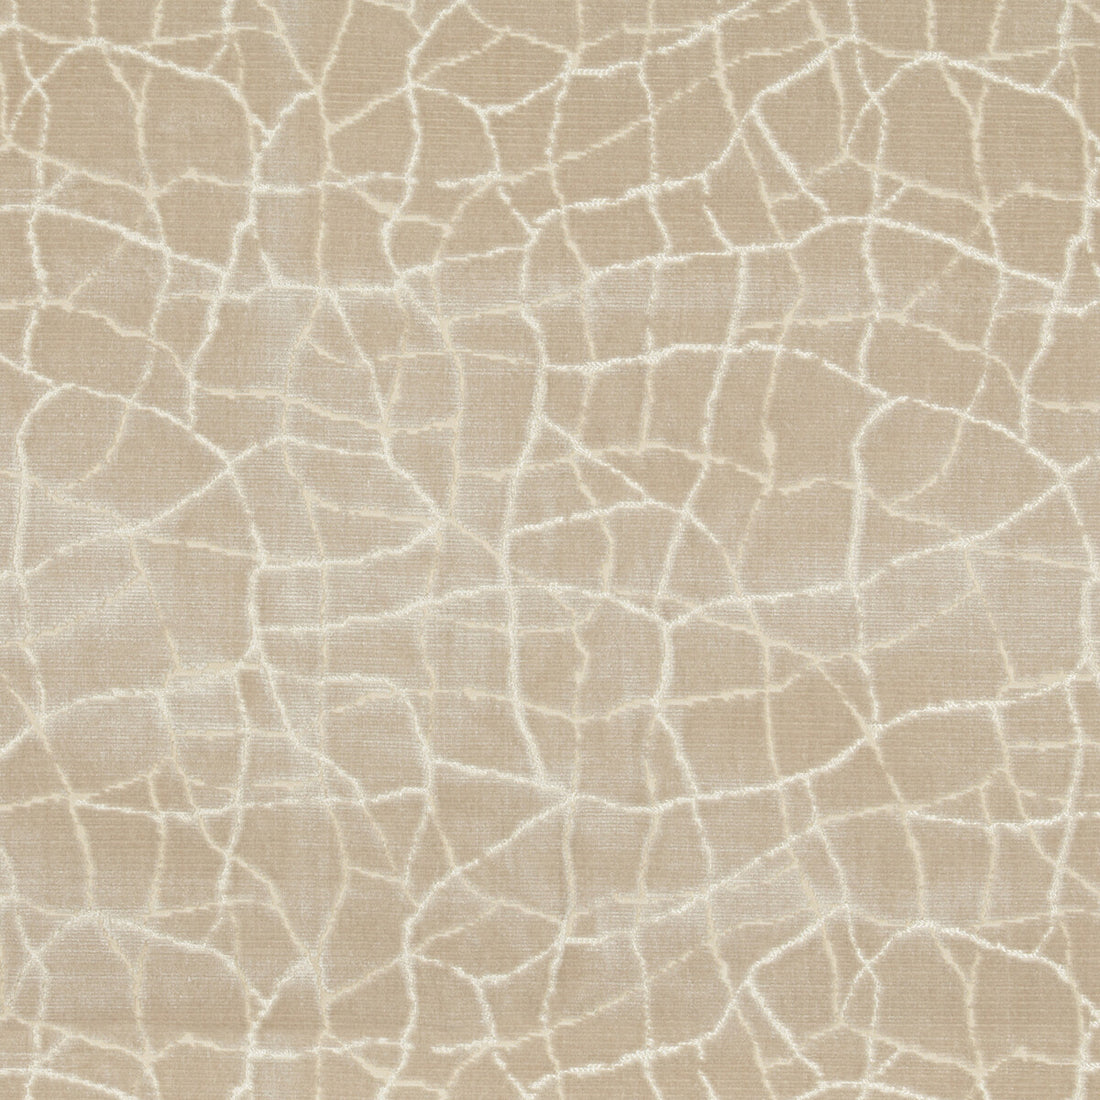 Formation fabric in champagne color - pattern 34780.16.0 - by Kravet Couture in the Artisan Velvets collection